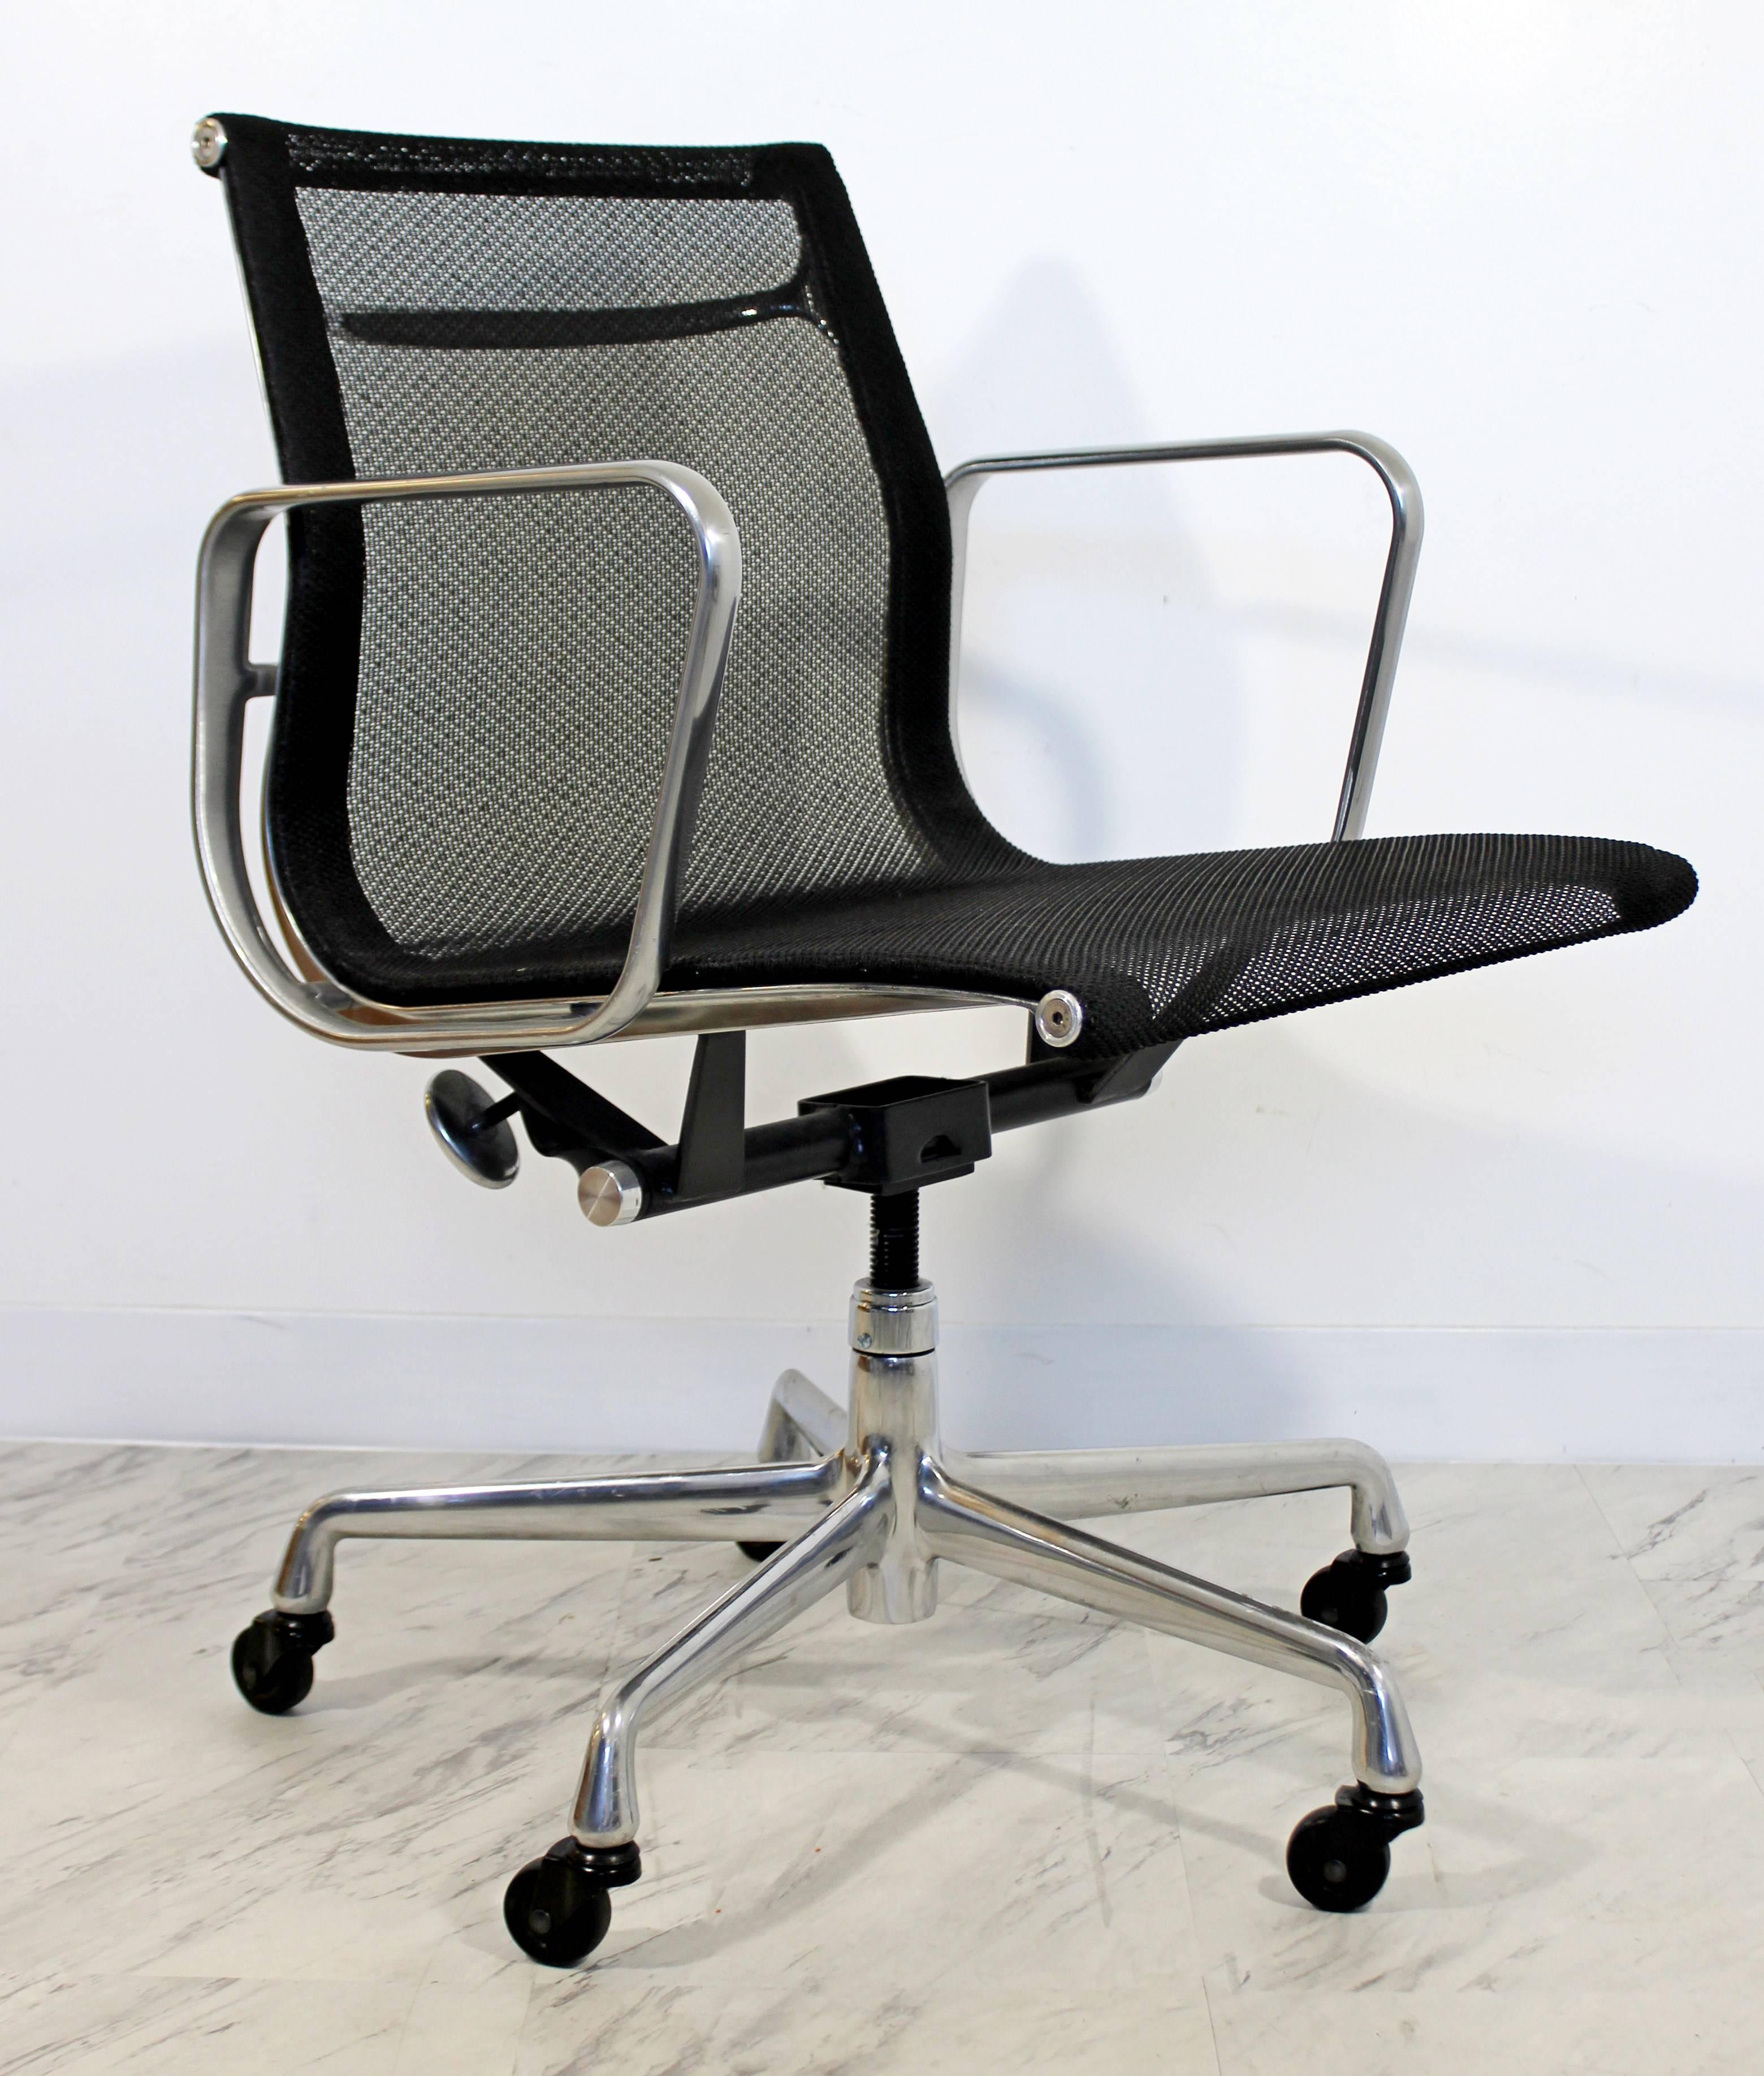 For your consideration is a fantastic set of six, aluminum group swivel, office chairs on casters, by Herman Miller. This set is a part of a 50th anniversary reproduction, circa 2008. In excellent condition. The dimensions are 22